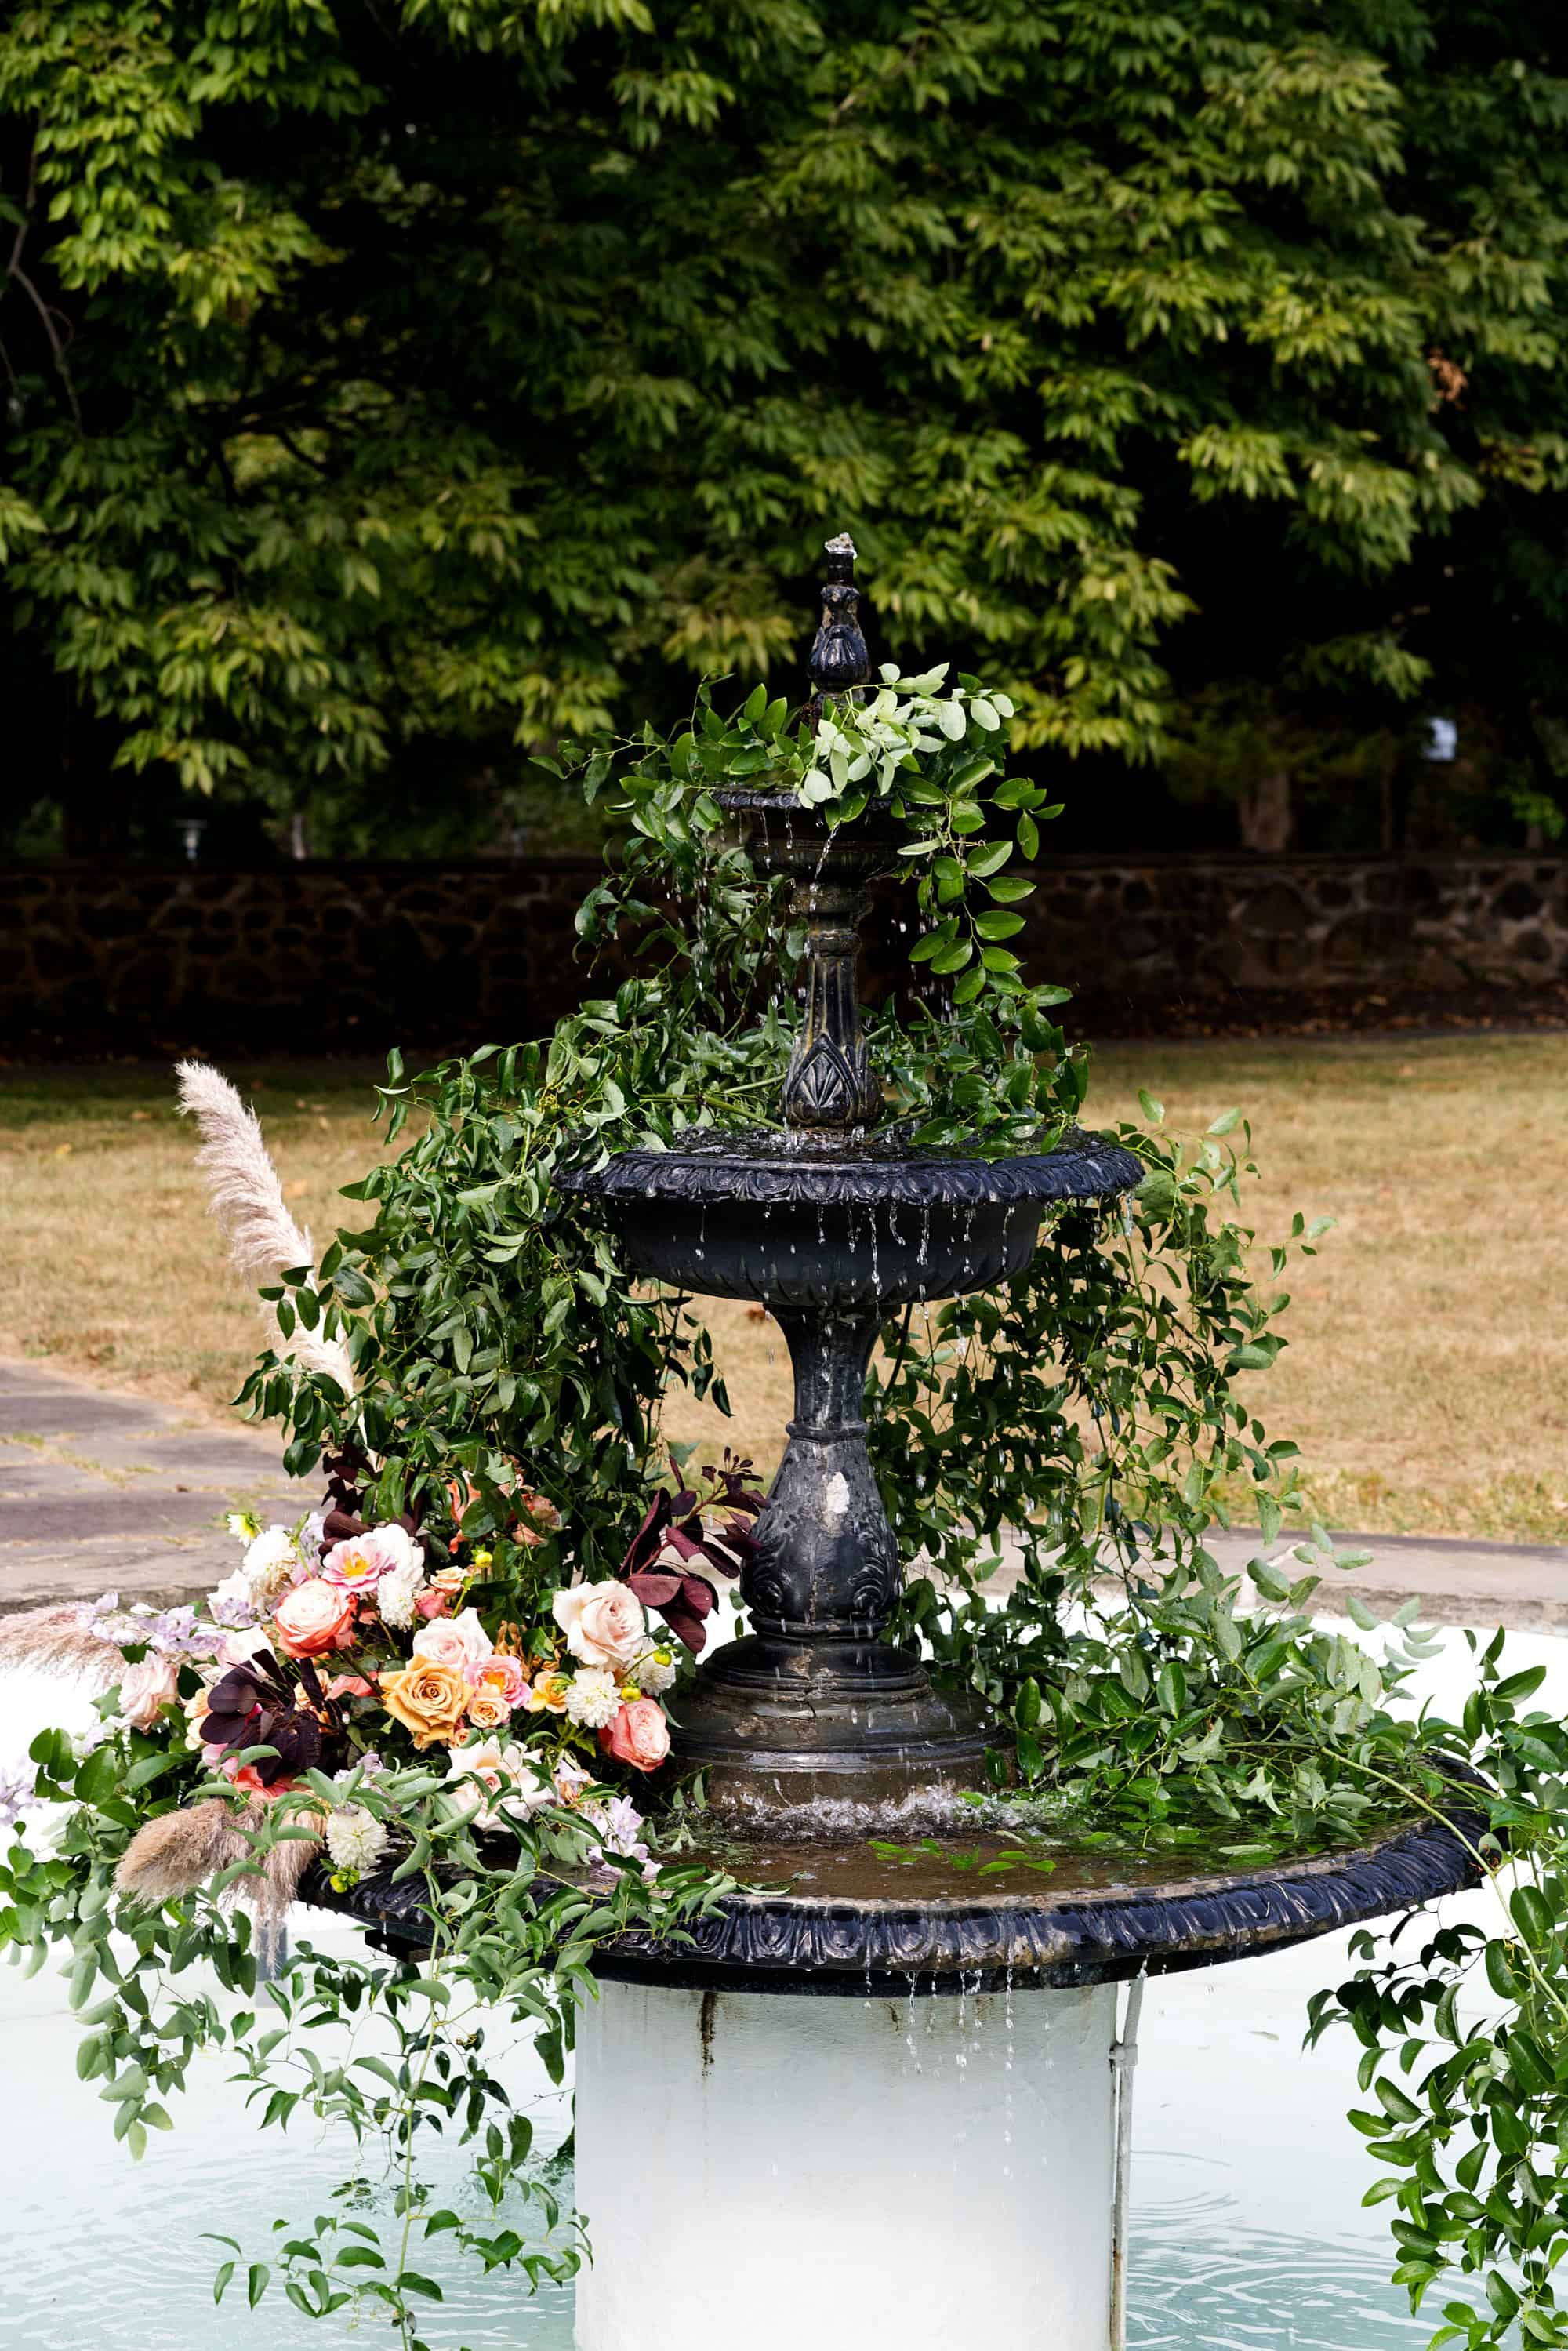 decor table set up Manor House Wedding decor set up princeton nj adams rental table decore flower plated chaires table reception outside fountain court yard outdoor ceremony flowers